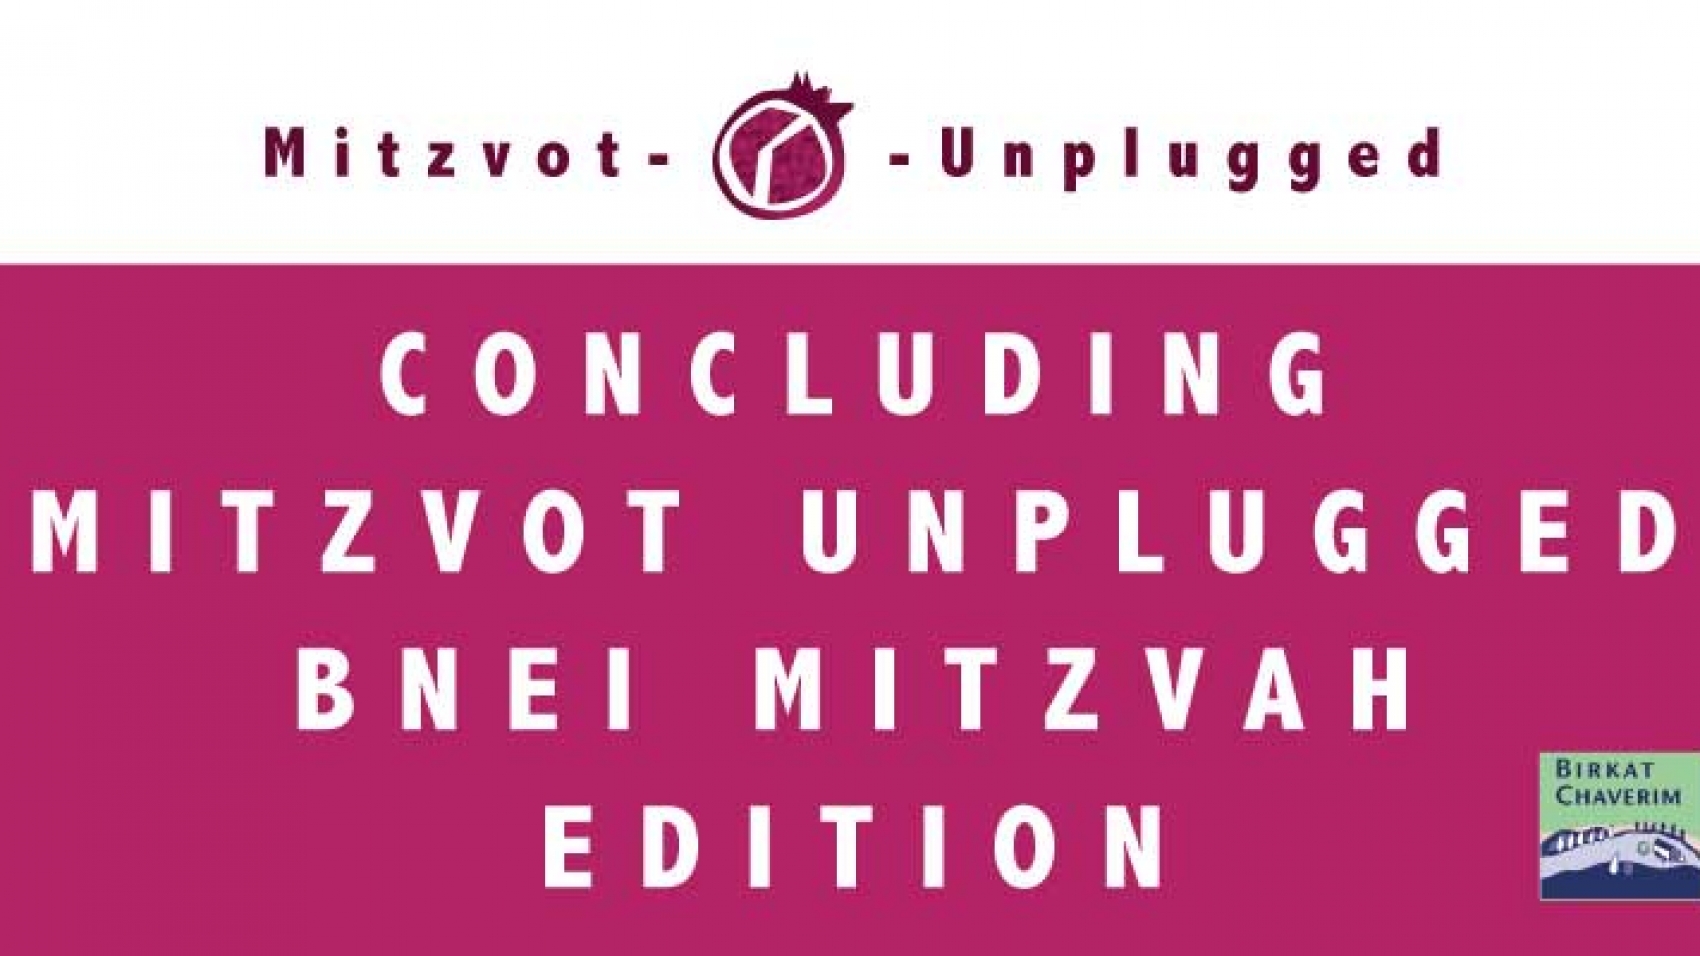 Concluding Mitzvot Unplugged Bnei Mitzvah Edition with logos